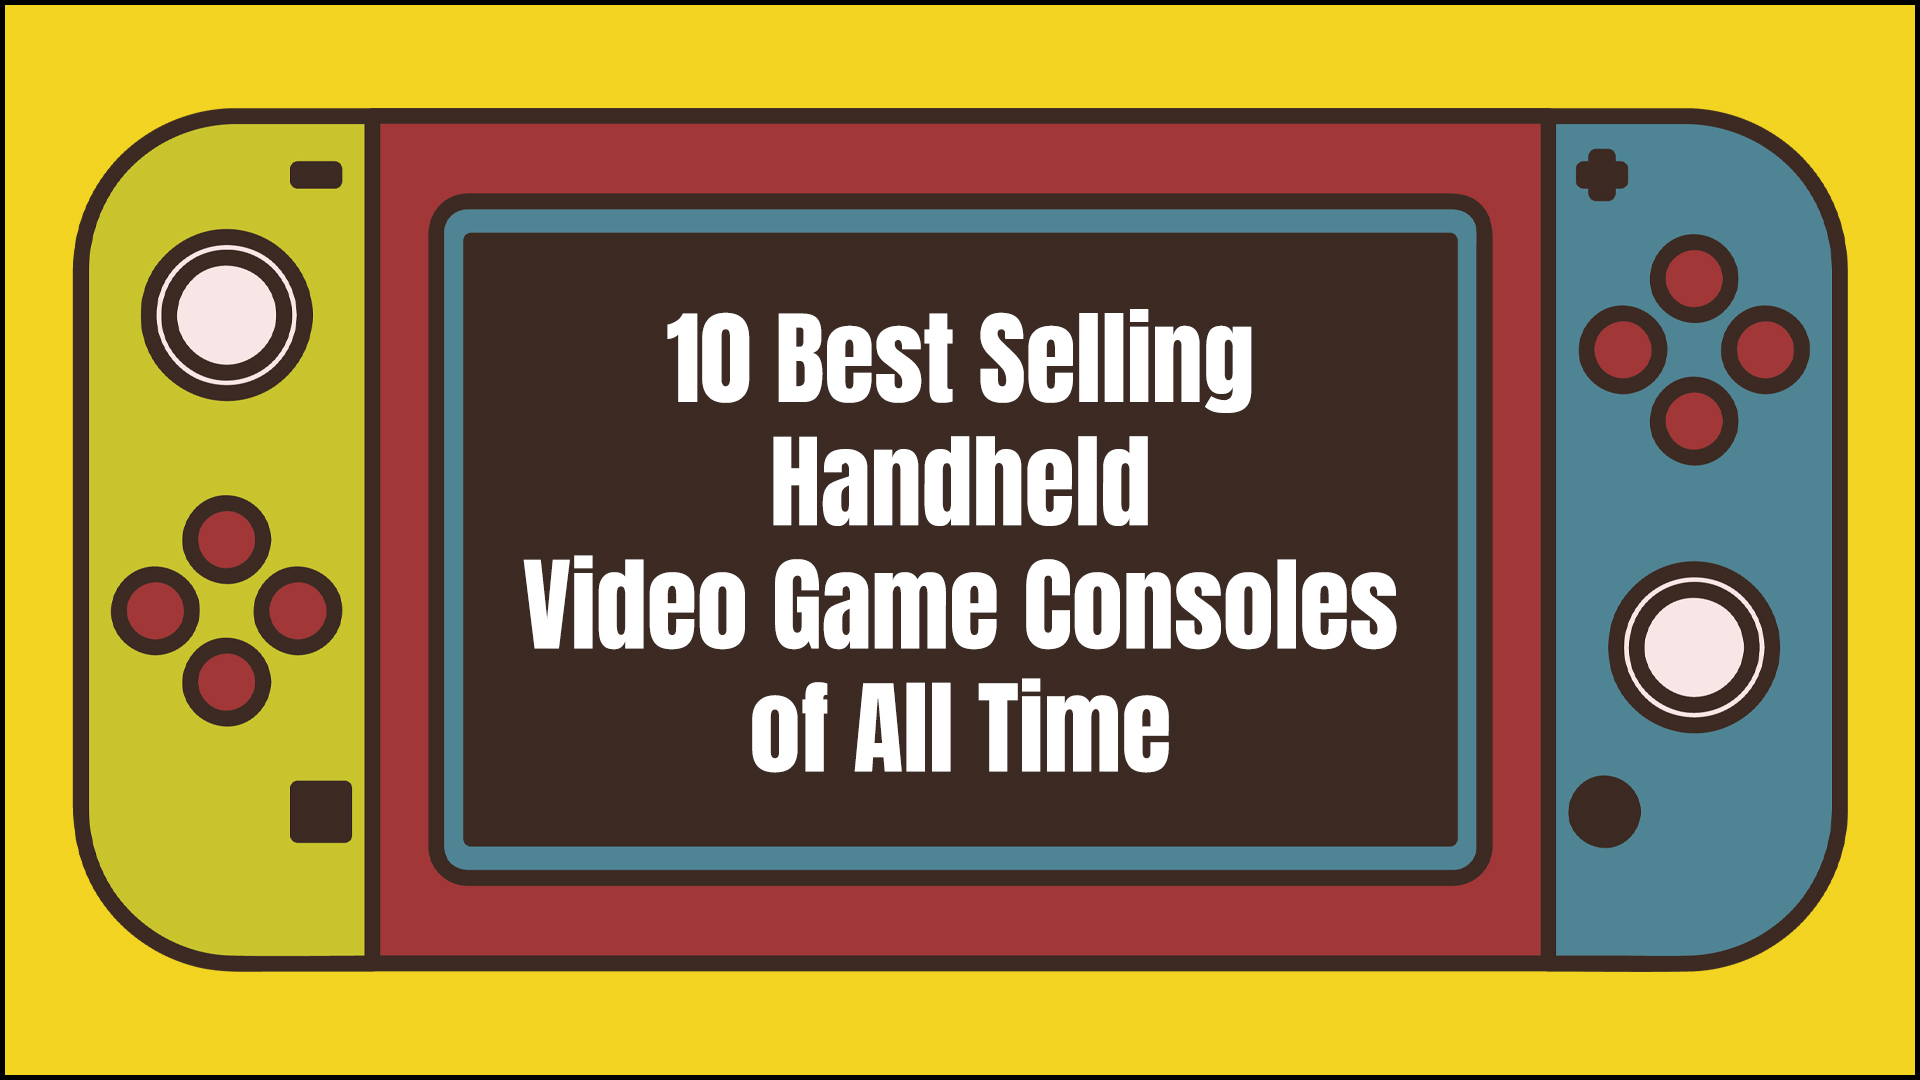 10 Best Selling Handheld Video Game Consoles of All Time